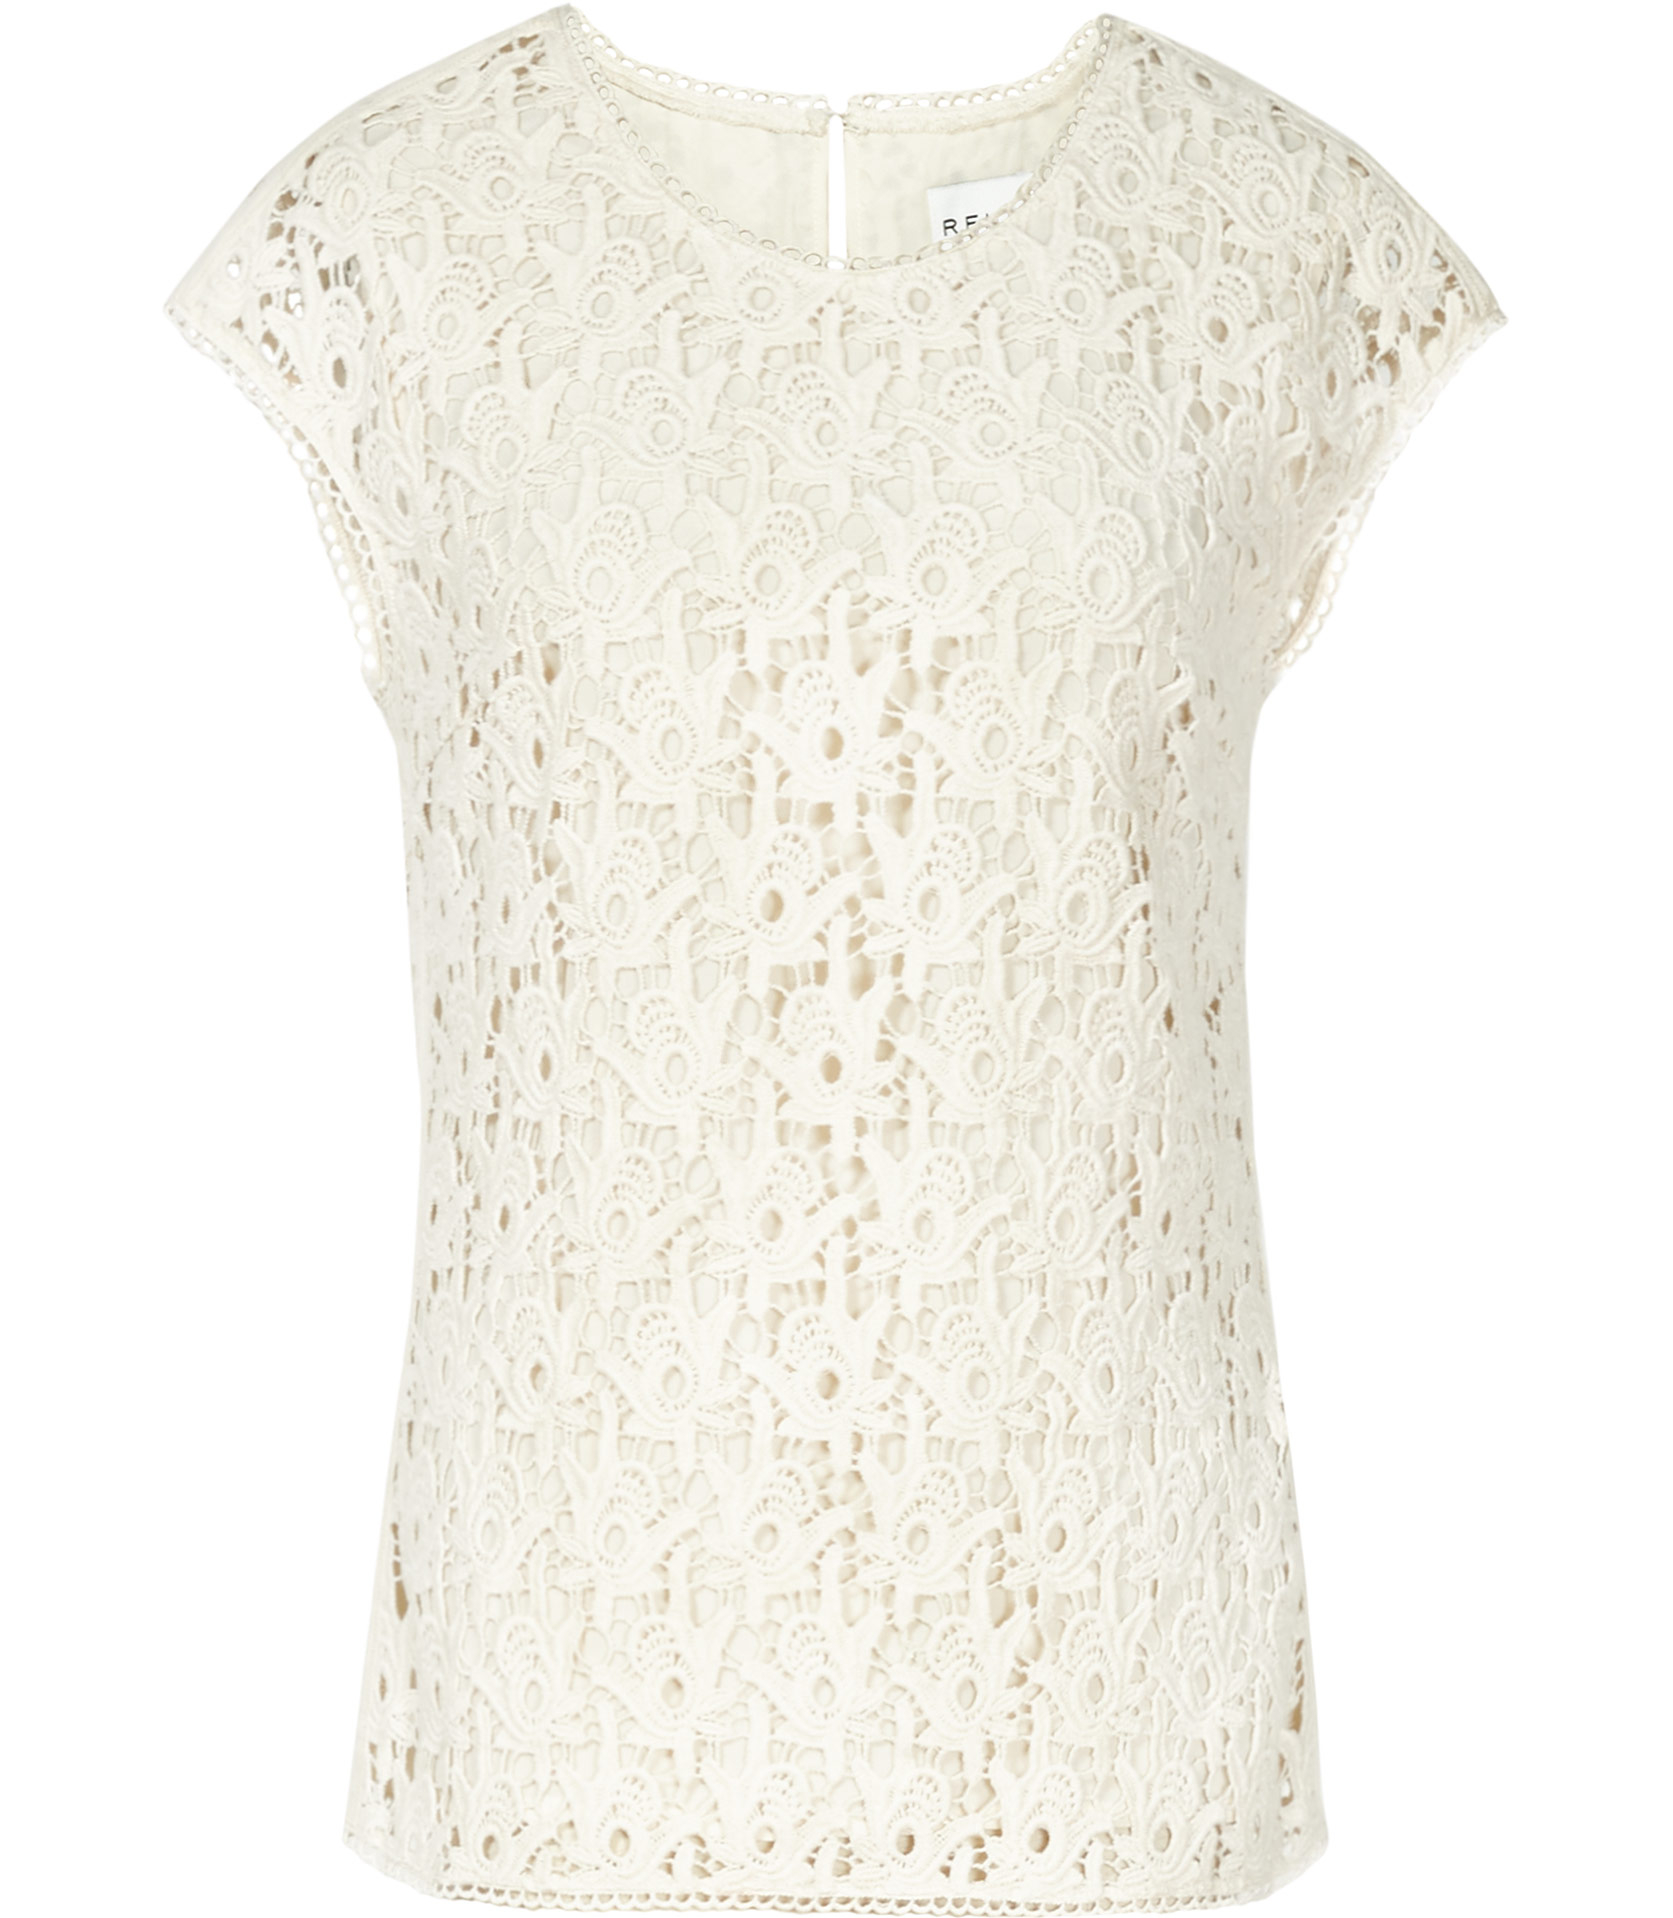 Lyst - Reiss Spears Lace Fitted Top in White